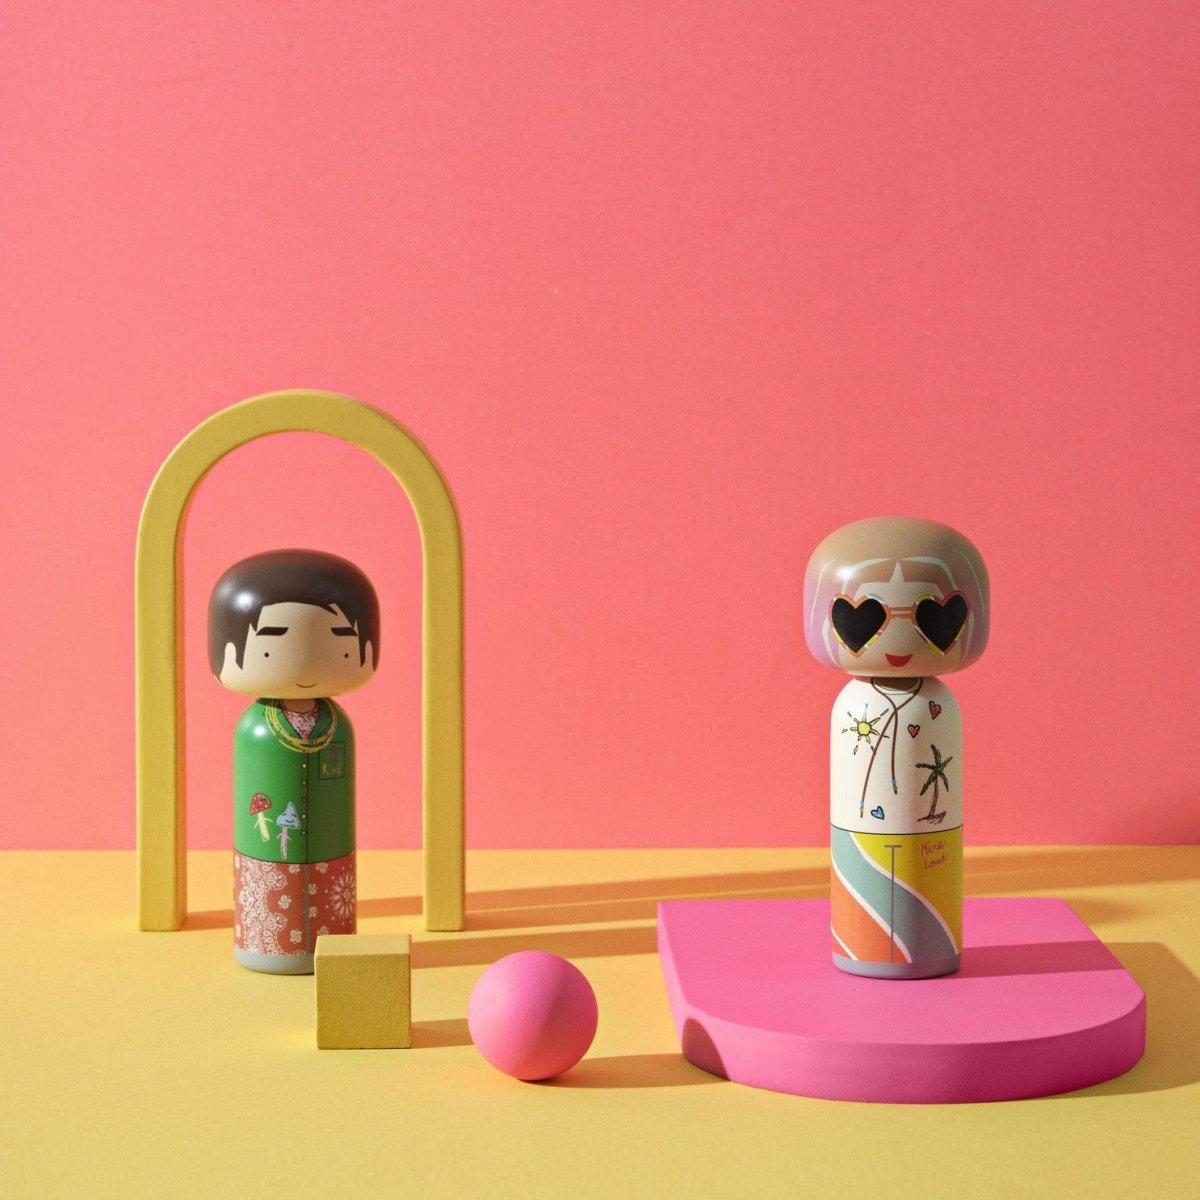 Mira Mikati and Gio Kokeshi dolls from Lucie Kaas&#39; Mira Mikati collection in an orange setting with pink decorations